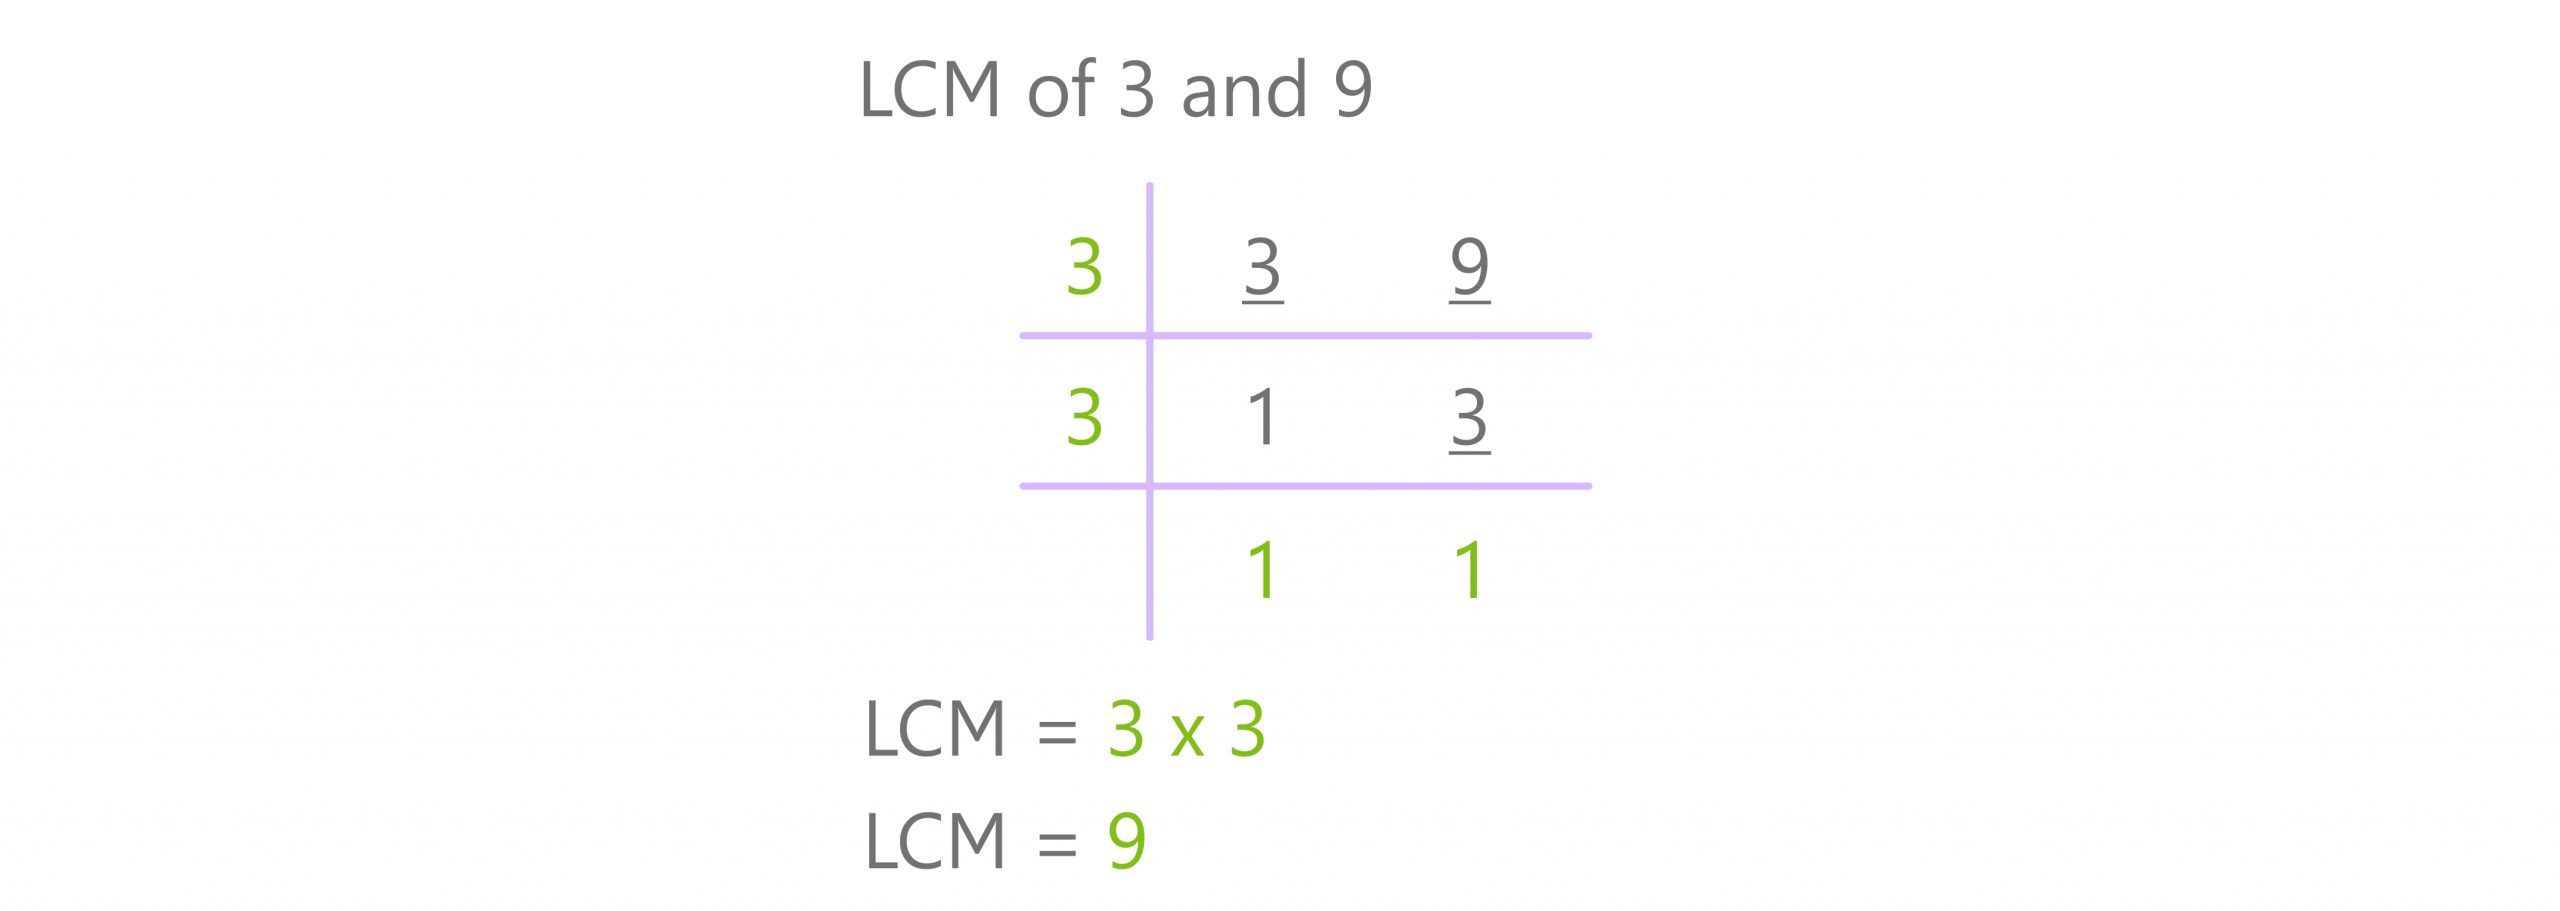 division method lcm of 3 and 9